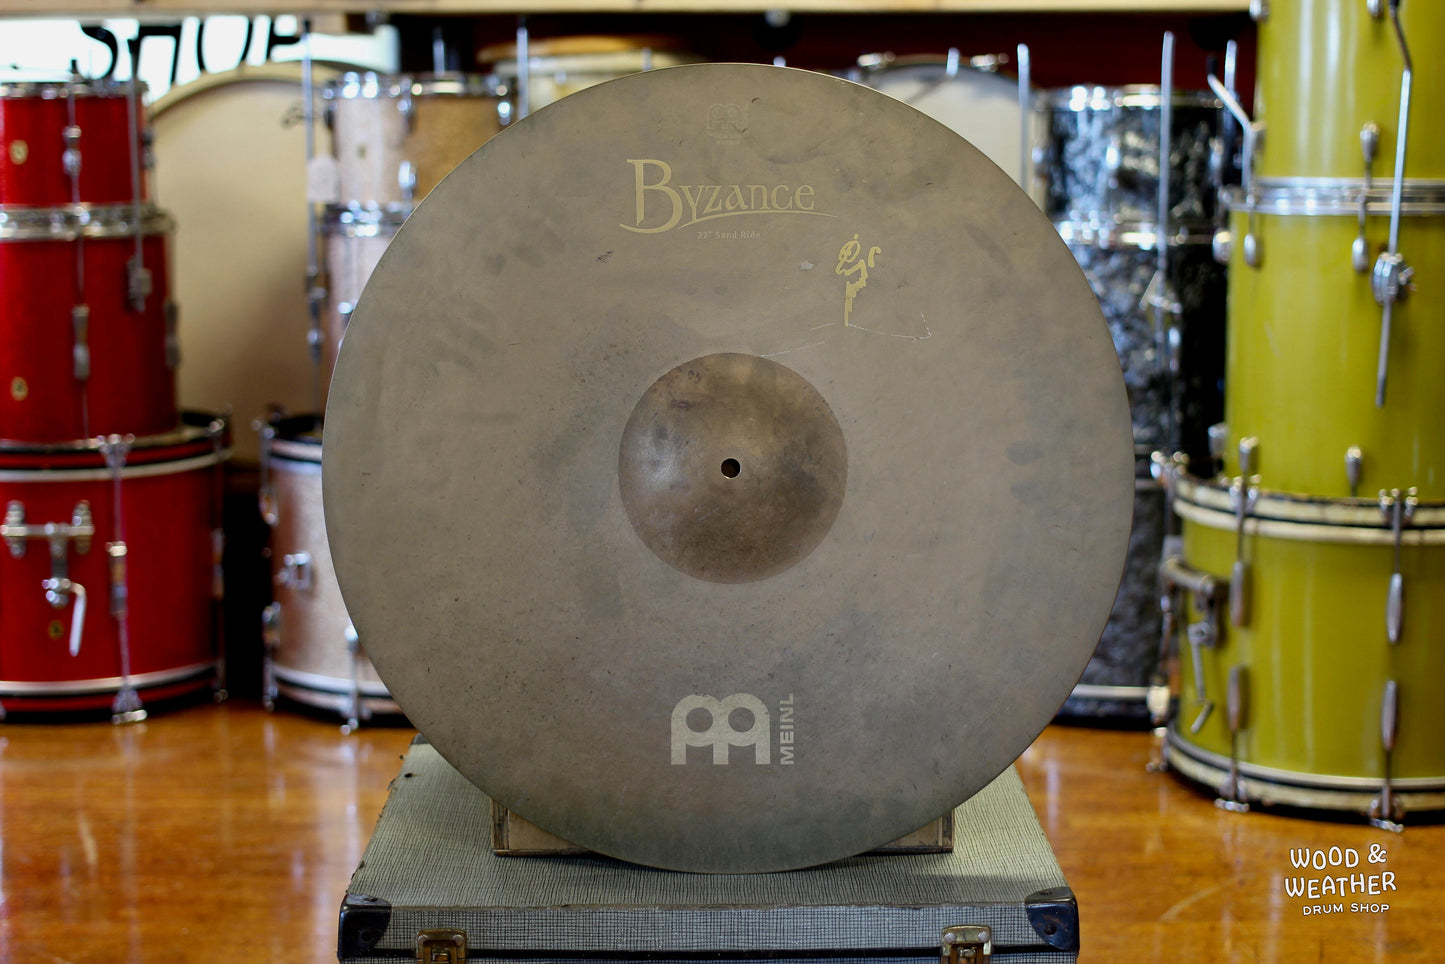 Used Meinl Cymbals 22" Byzance Sand Ride 2120g